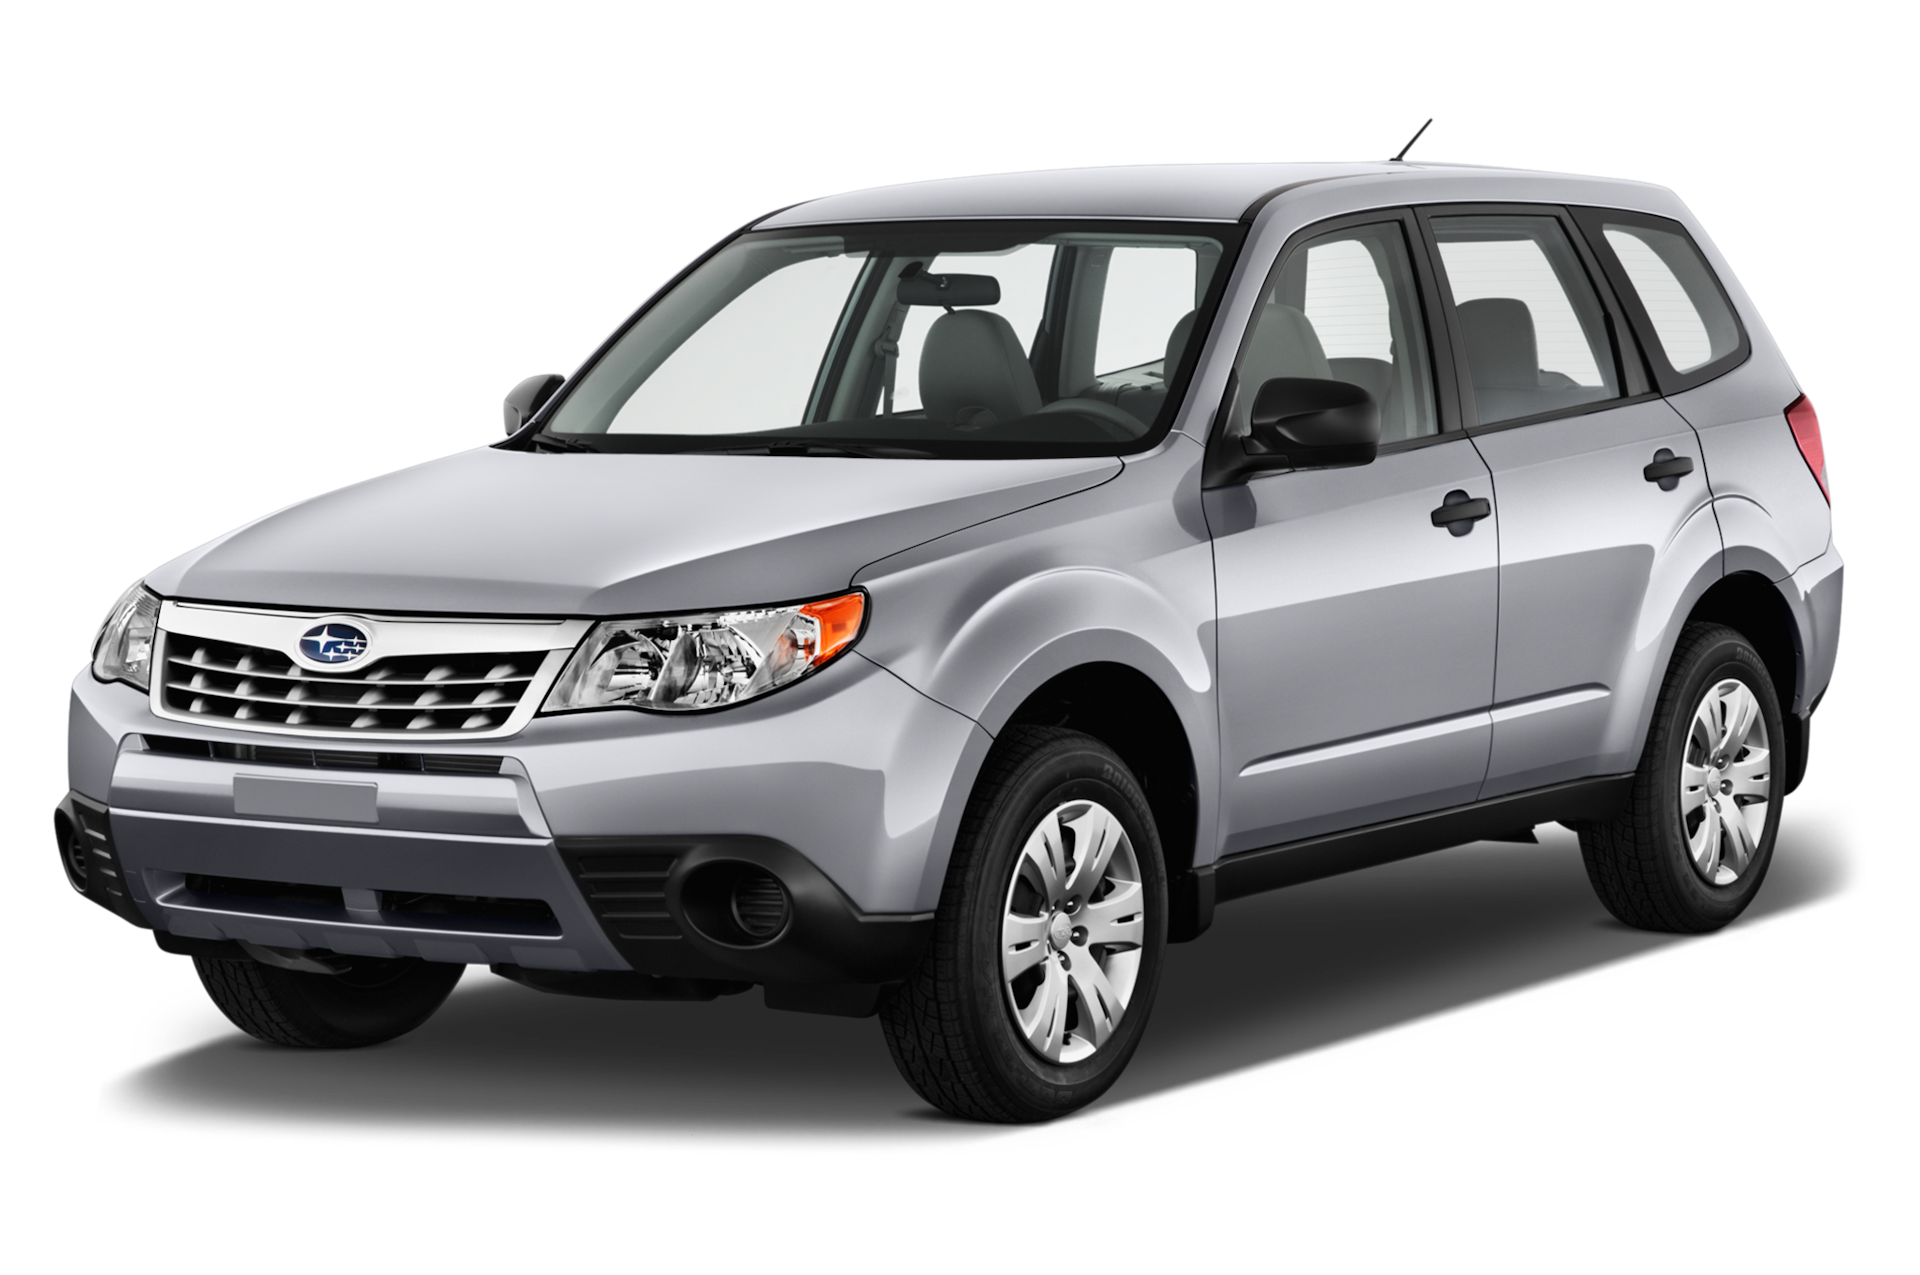 2013 Subaru Forester Prices, Reviews, and Photos - MotorTrend